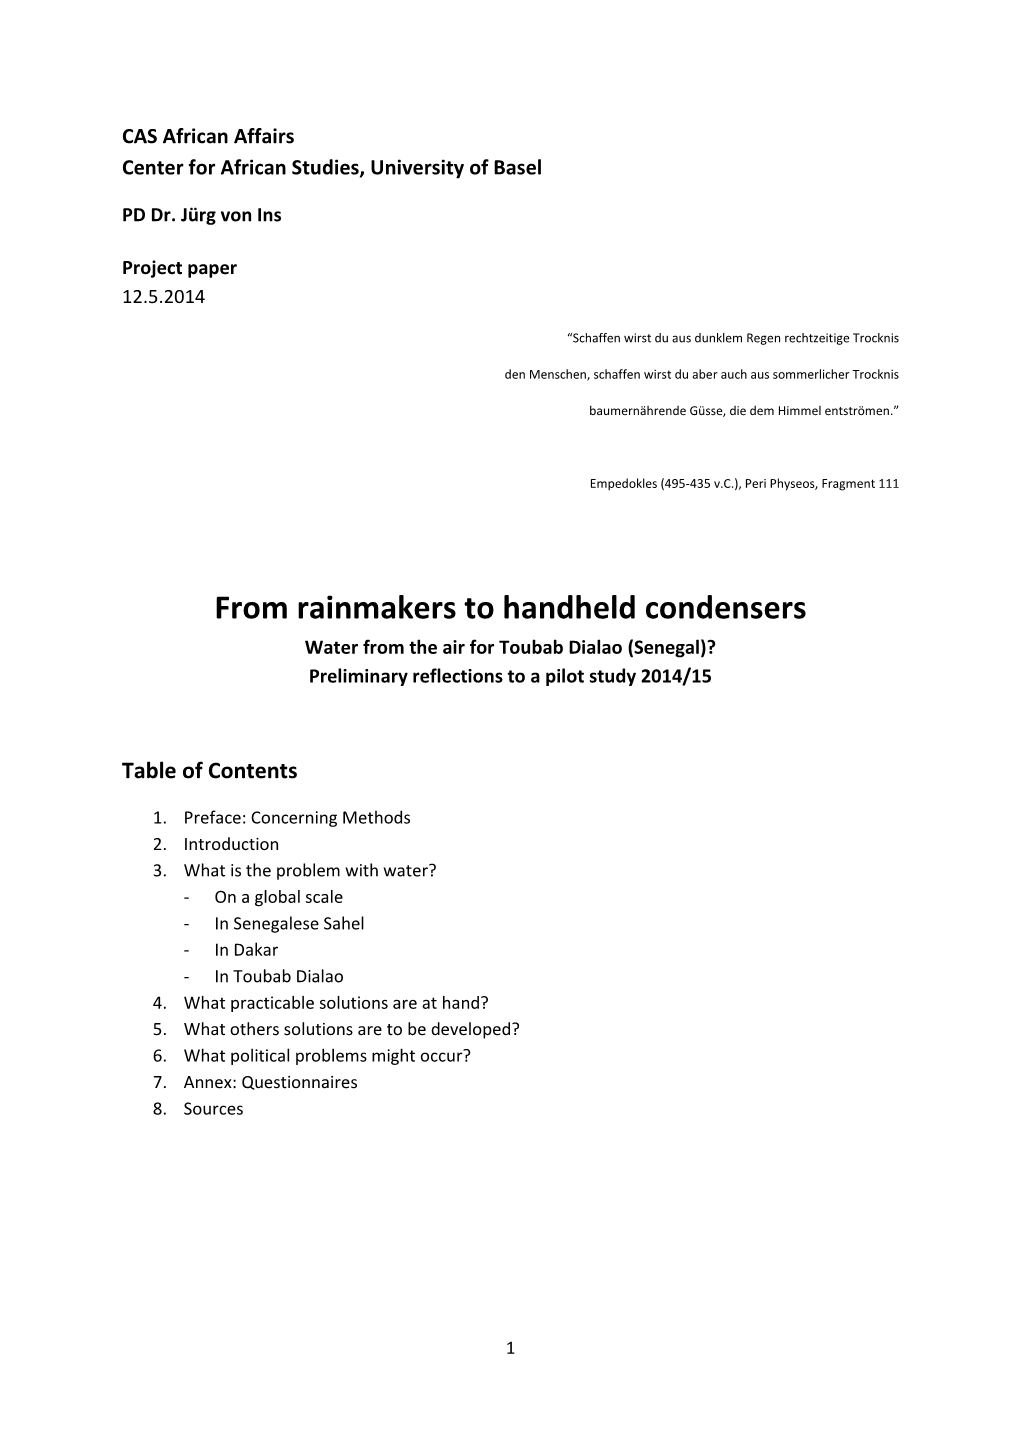 From Rainmakers to Handheld Condensers Water from the Air for Toubab Dialao (Senegal)? Preliminary Reflections to a Pilot Study 2014/15